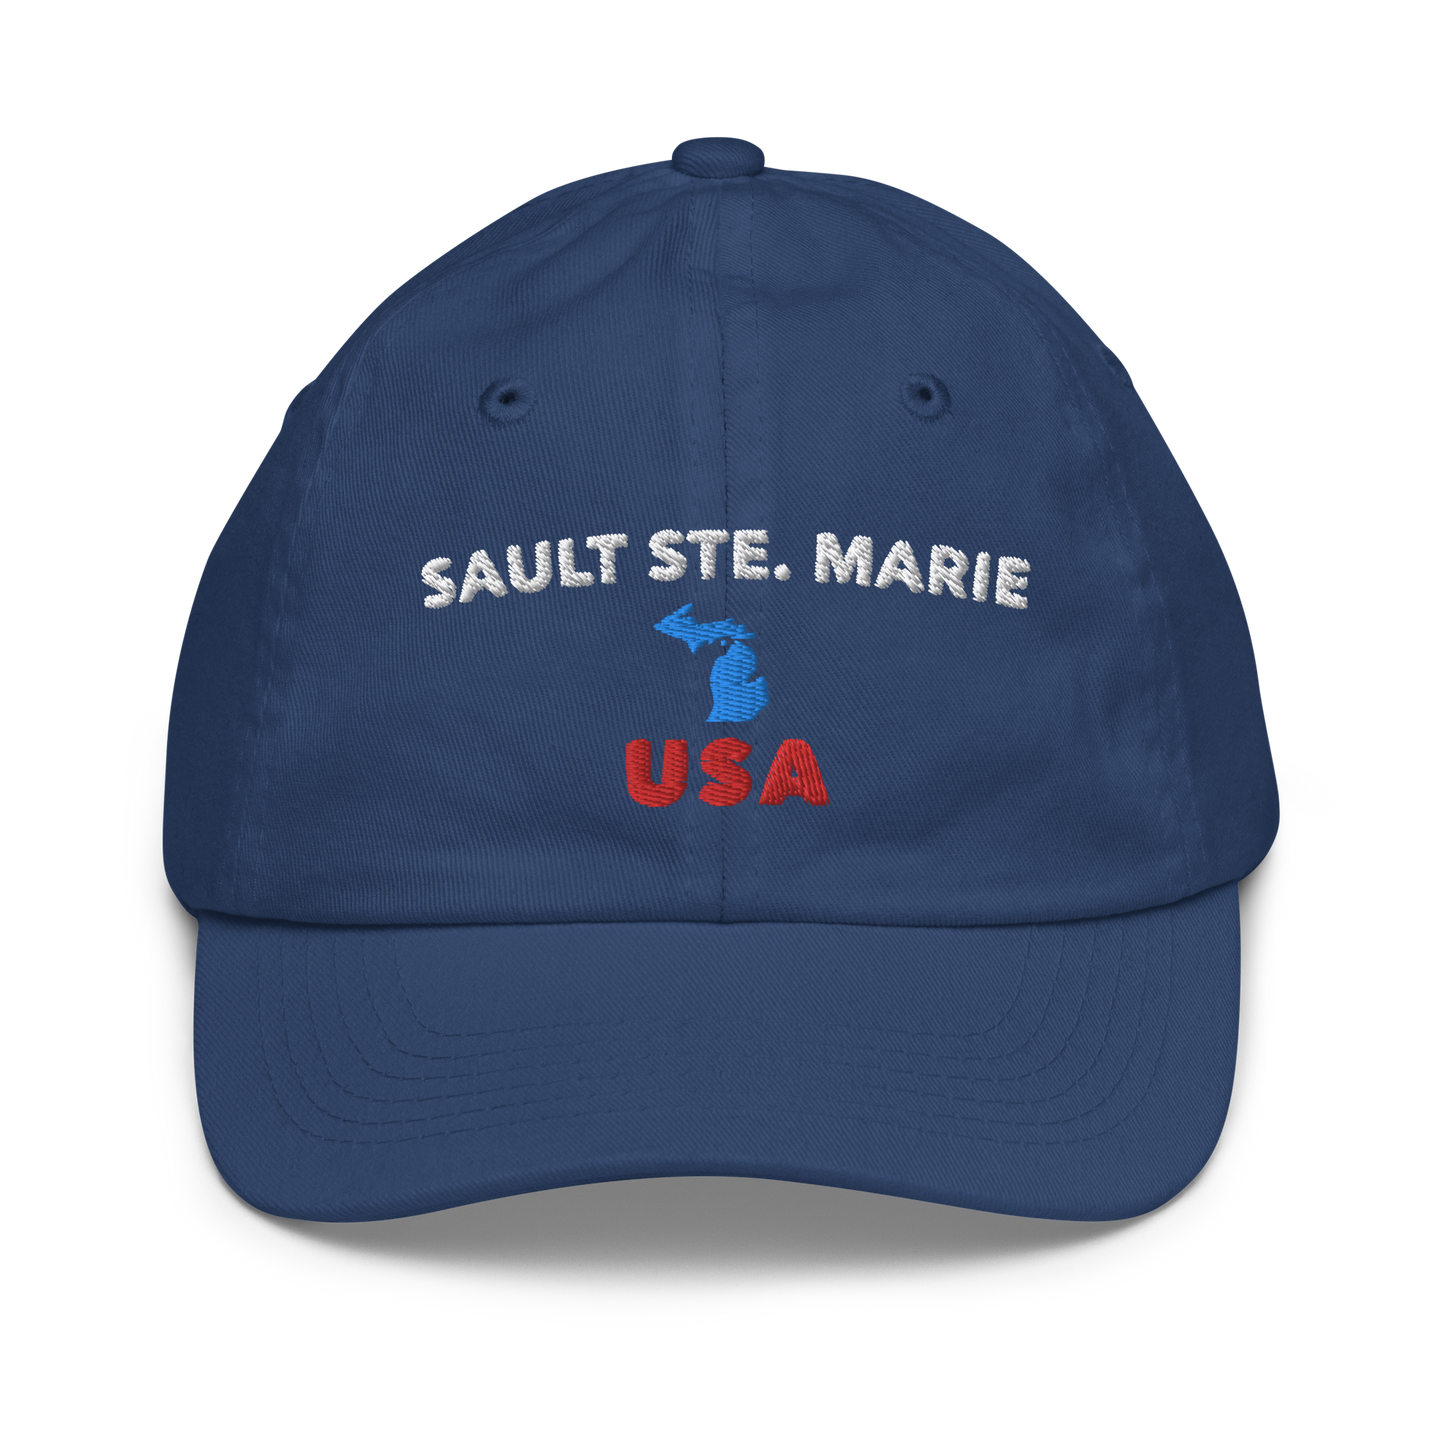 'Sault Ste. Marie USA' Youth Baseball Cap (w/ Michigan Outline)